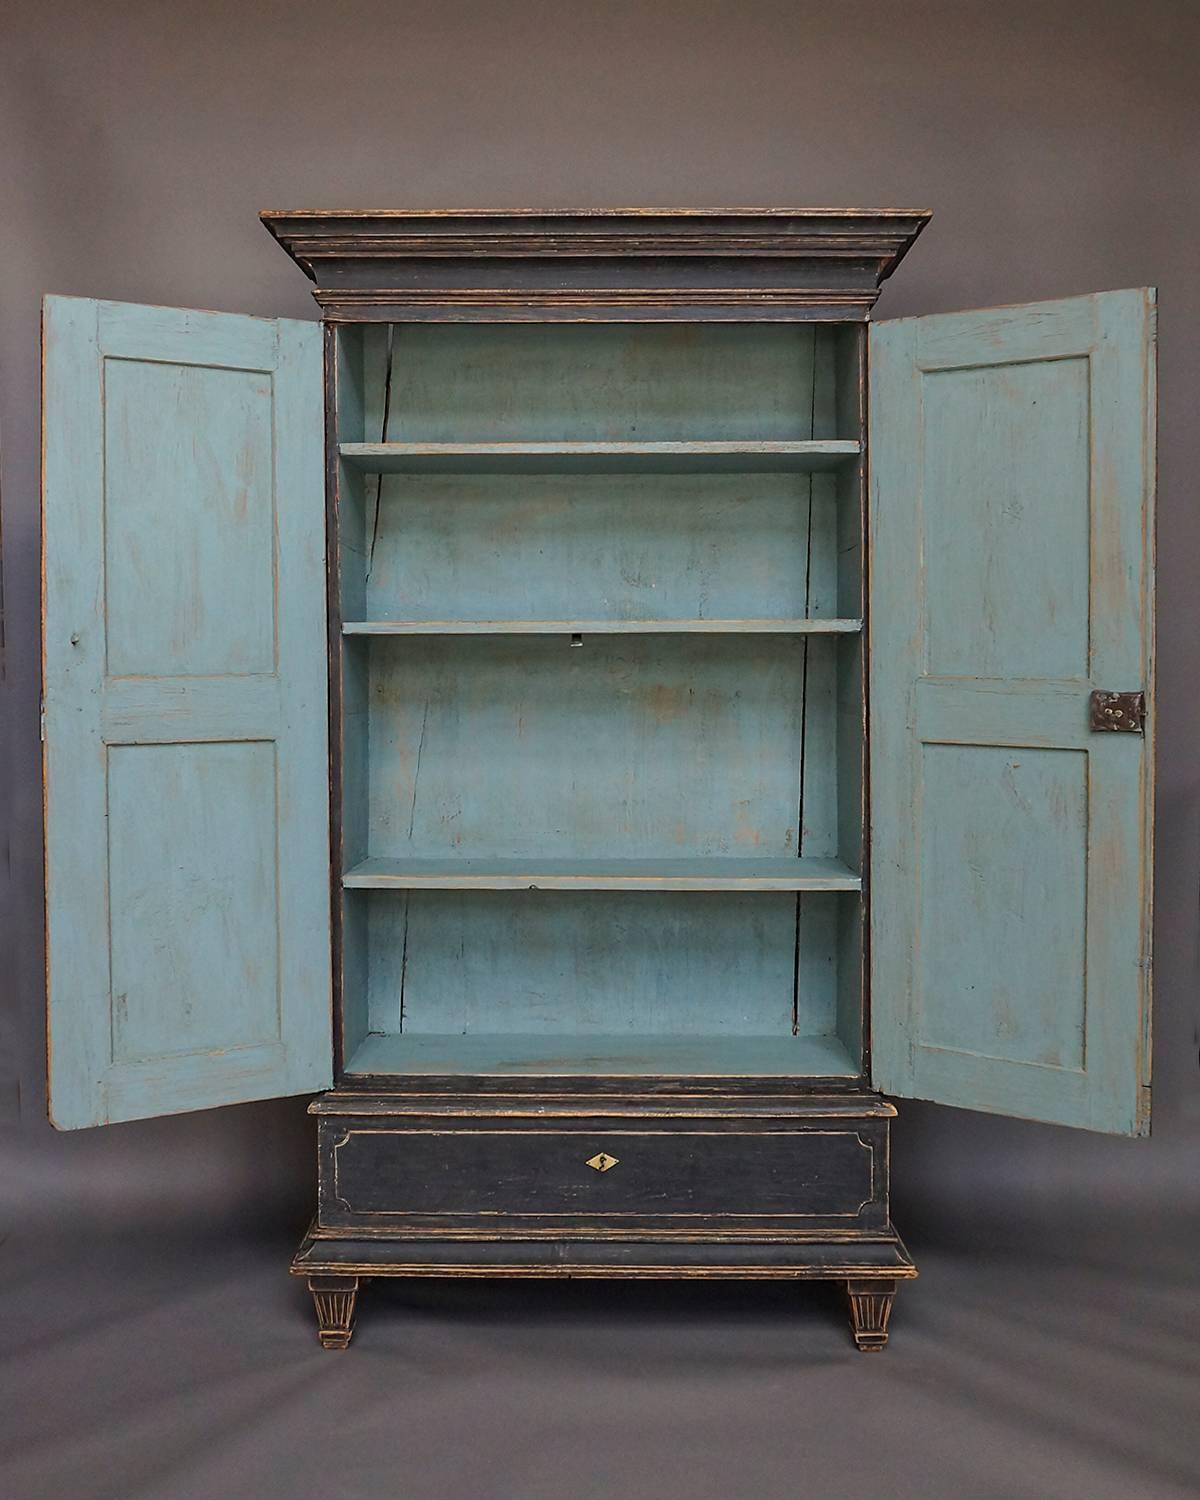 Gustavian cabinet, Sweden, circa 1800, with bold cornice, two full height doors with reeded panels, and single drawer at the bottom. Three interior shelves. Tapering square feet with carved detail. A rare find.